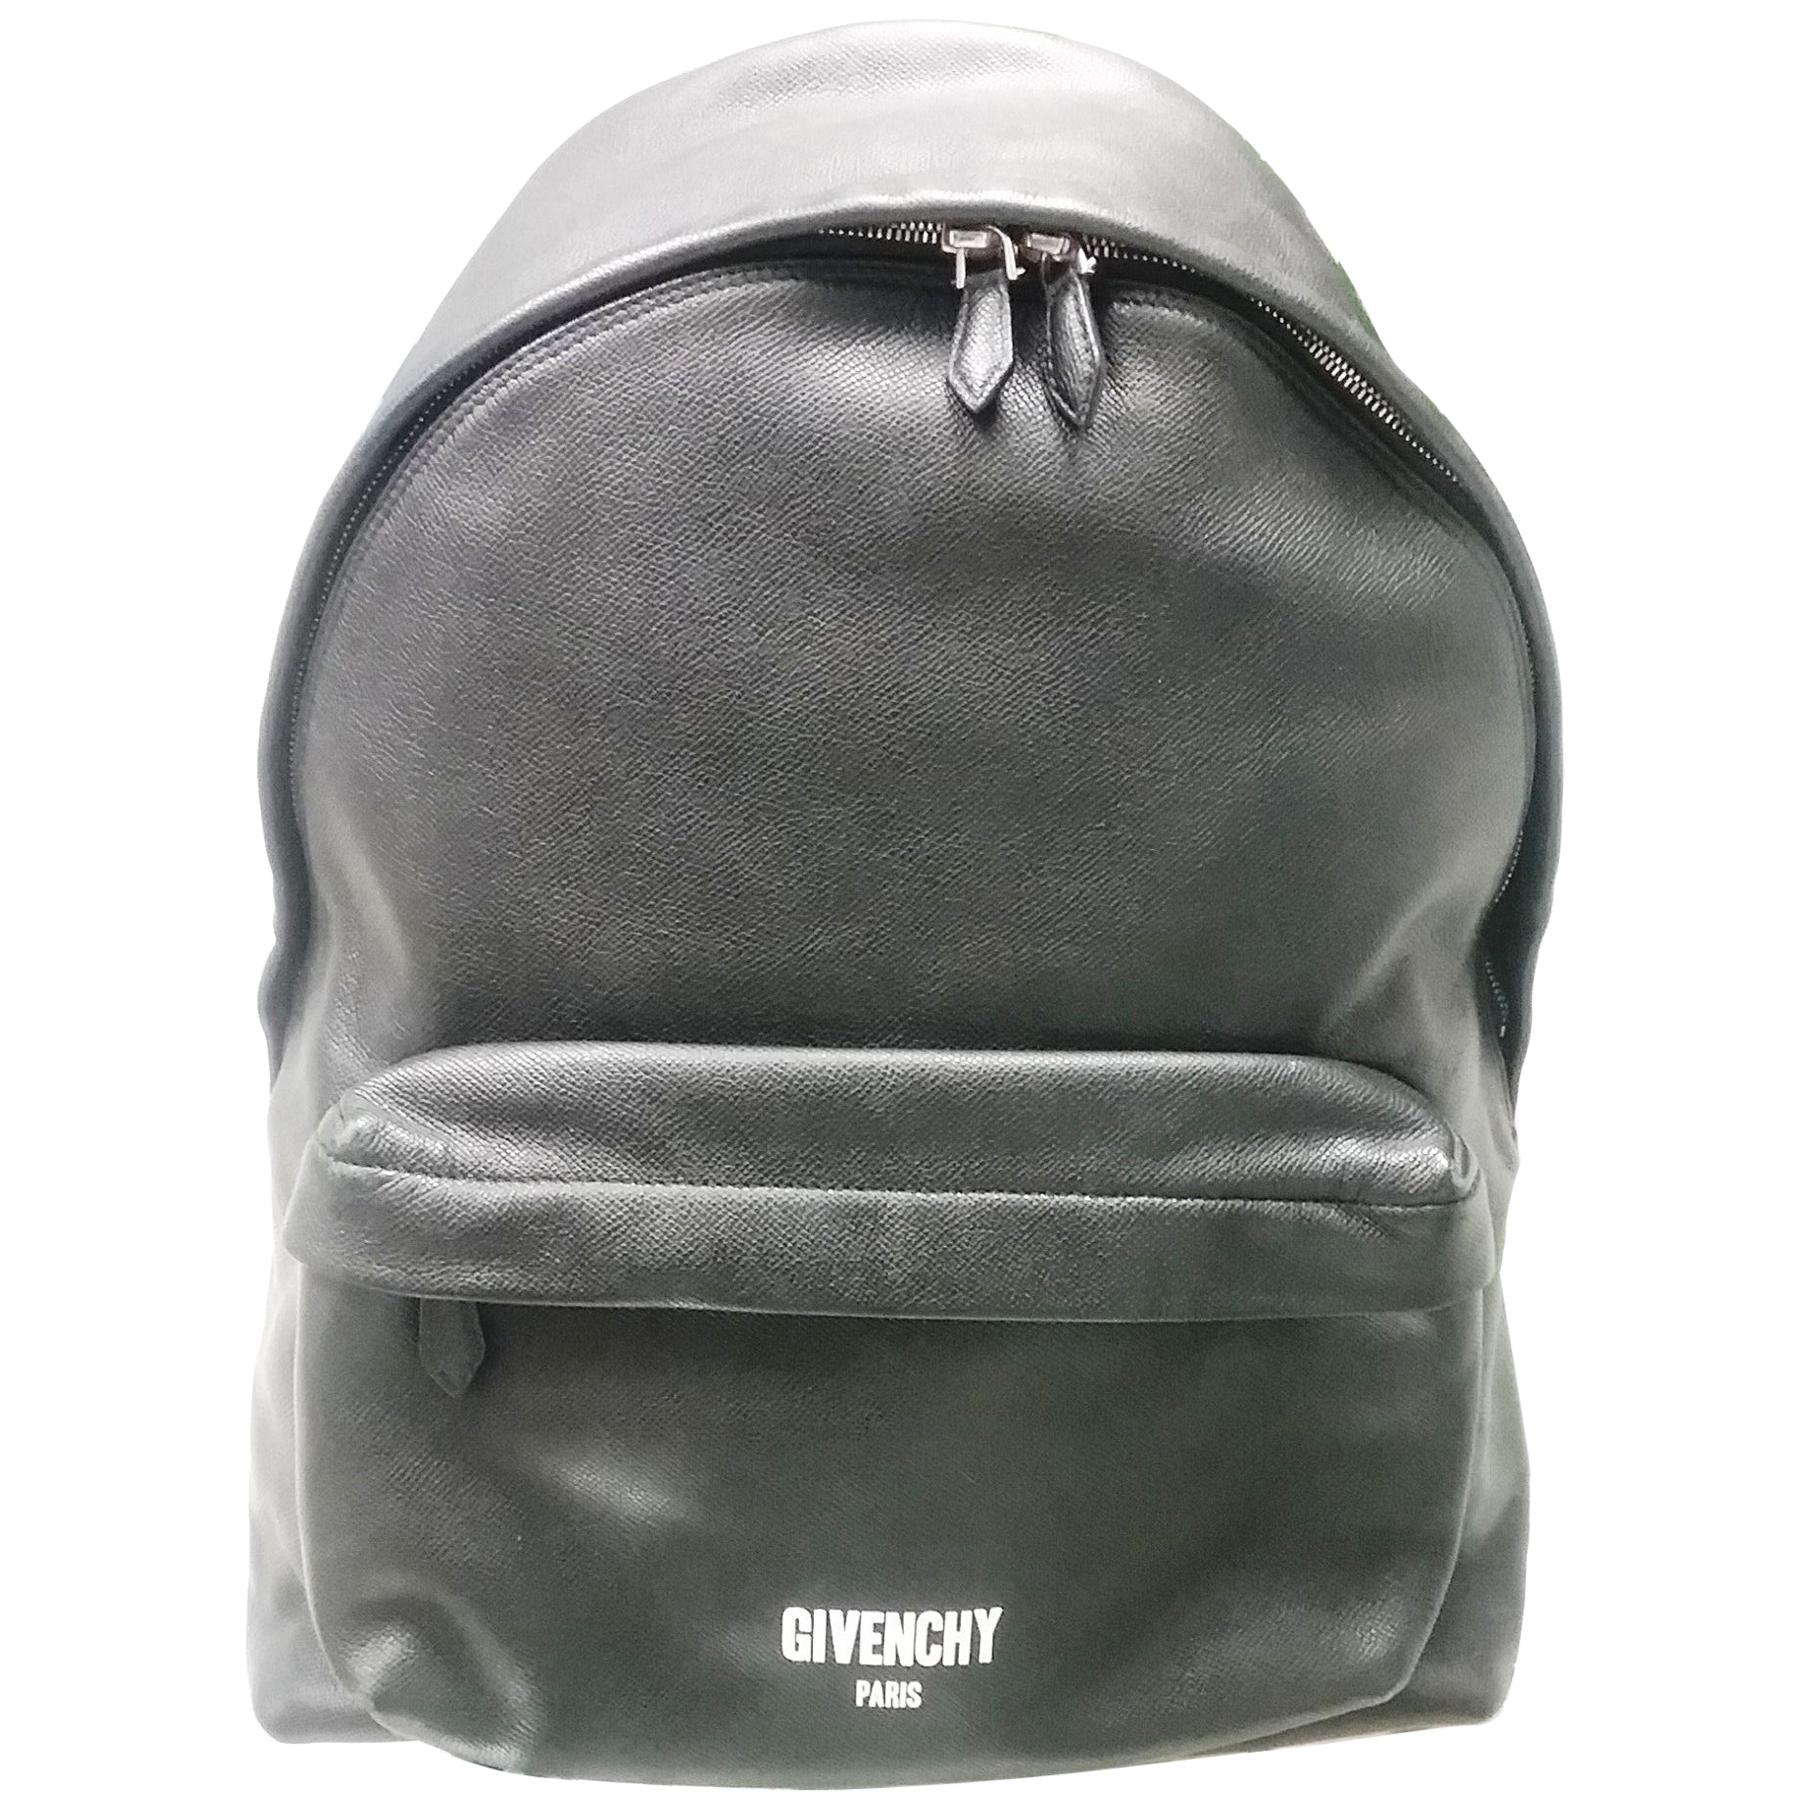 Givenchy Black Leather Backpack with White Logo For Sale